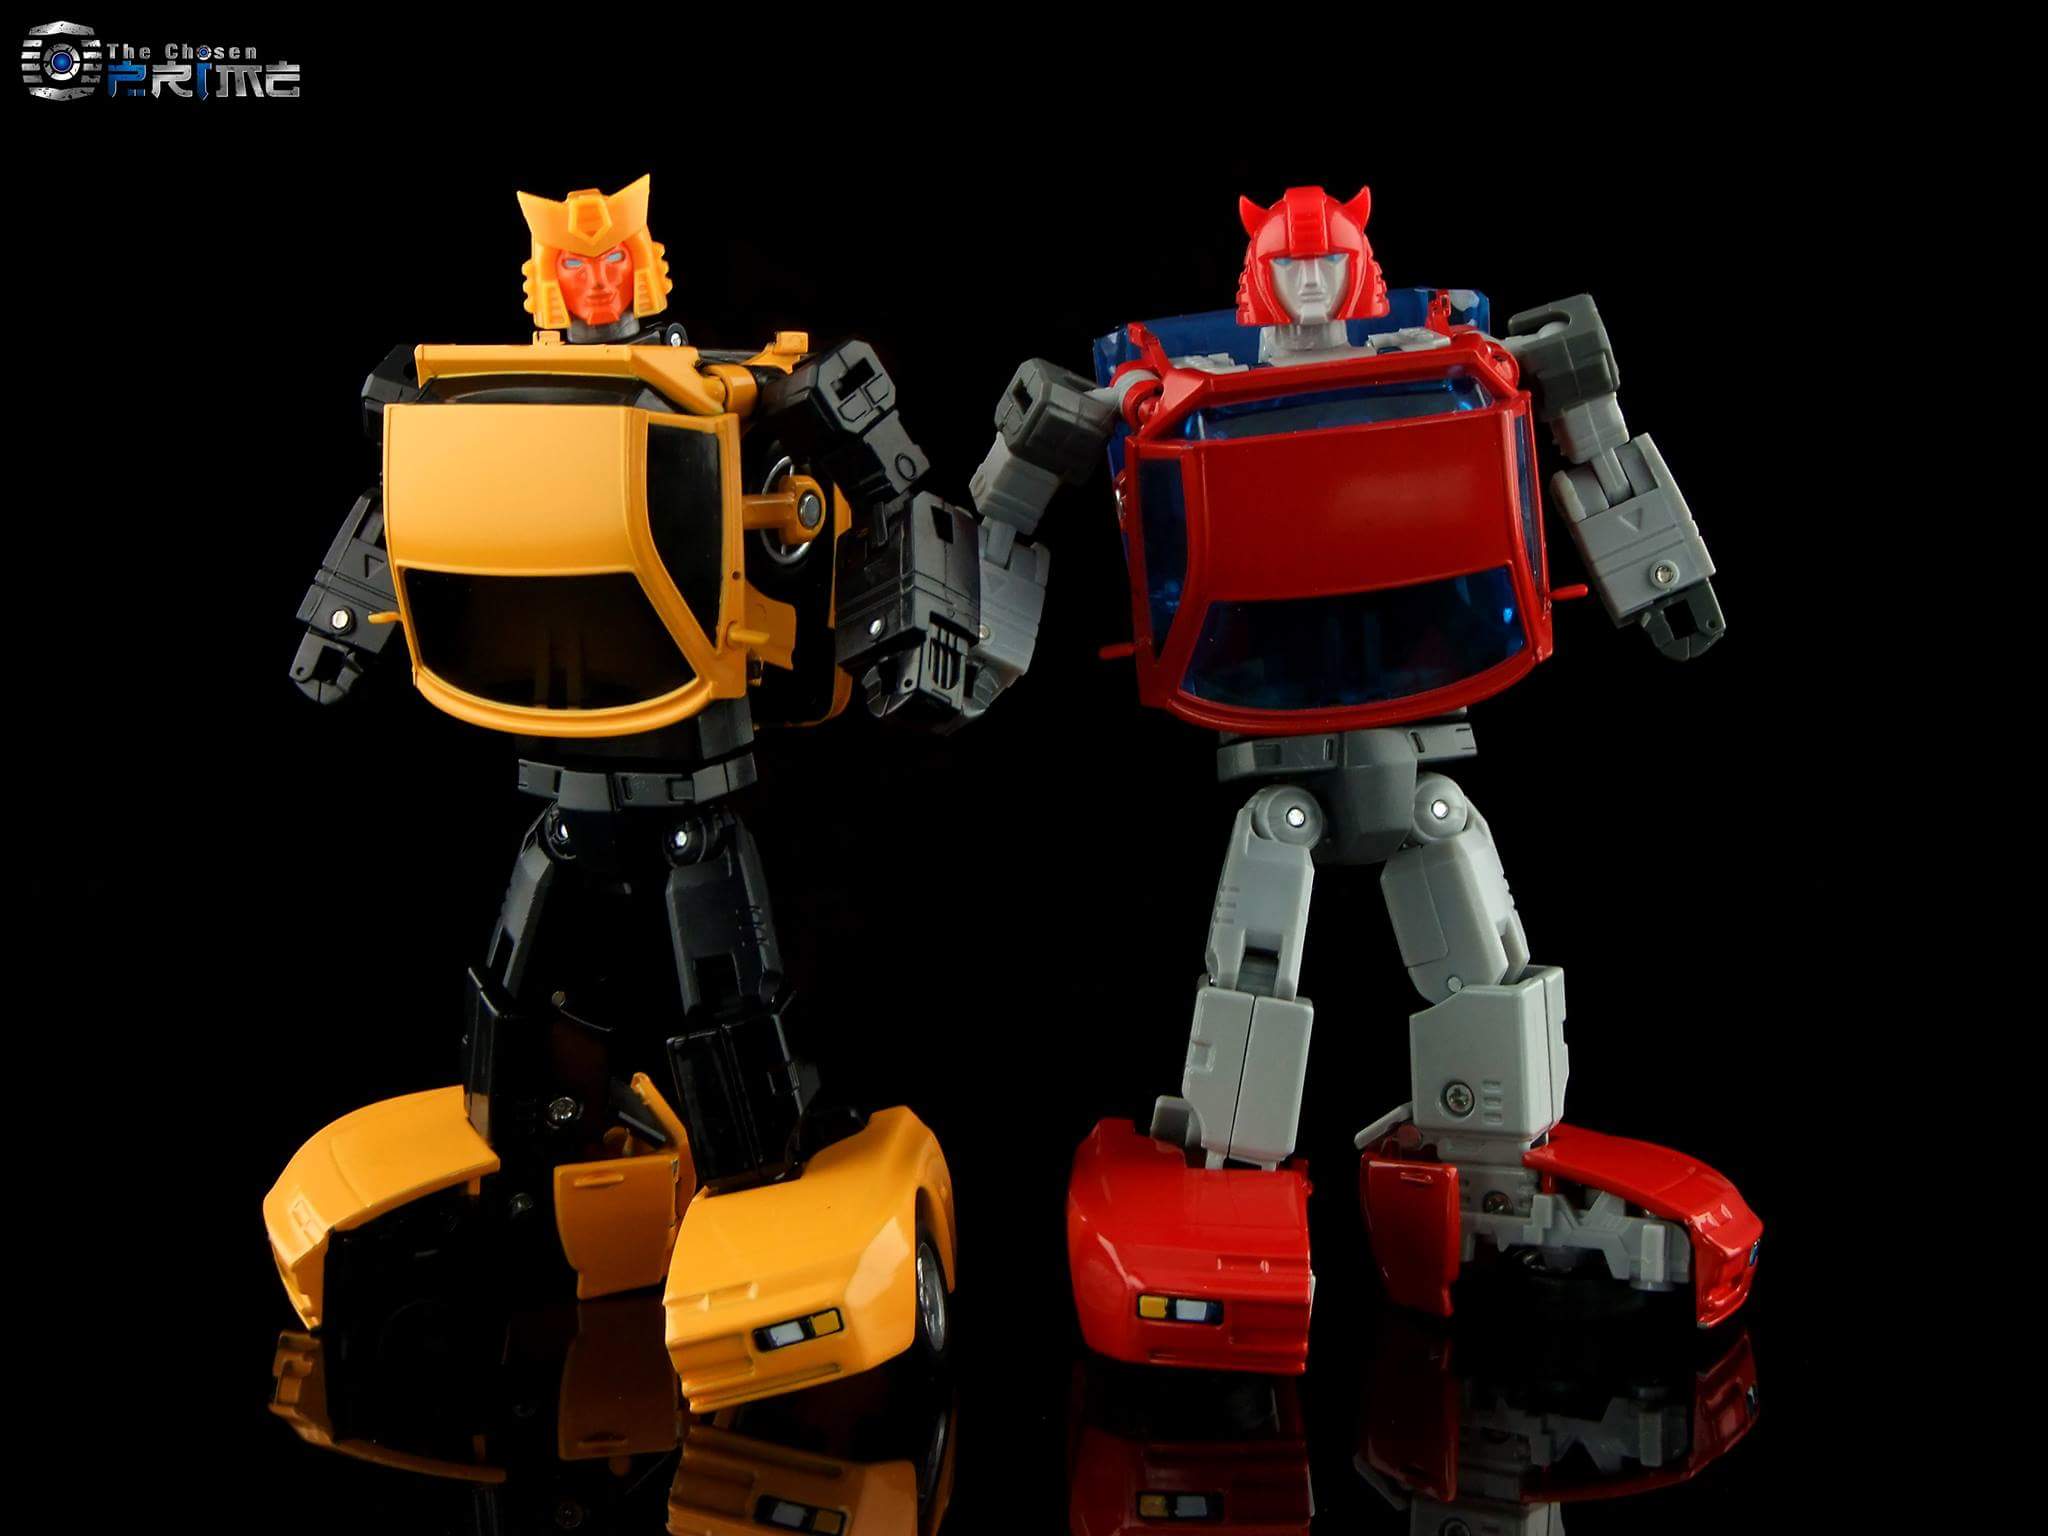 [ACE Collectables] Produit Tiers - Minibots MP - ACE-01 Tumbler (aka Cliffjumper/Matamore), ACE-02 Hiccups (aka Hubcap/Virevolto), ACE-03 Trident (aka Seaspray/Embruns) Pc7RGZ4Y